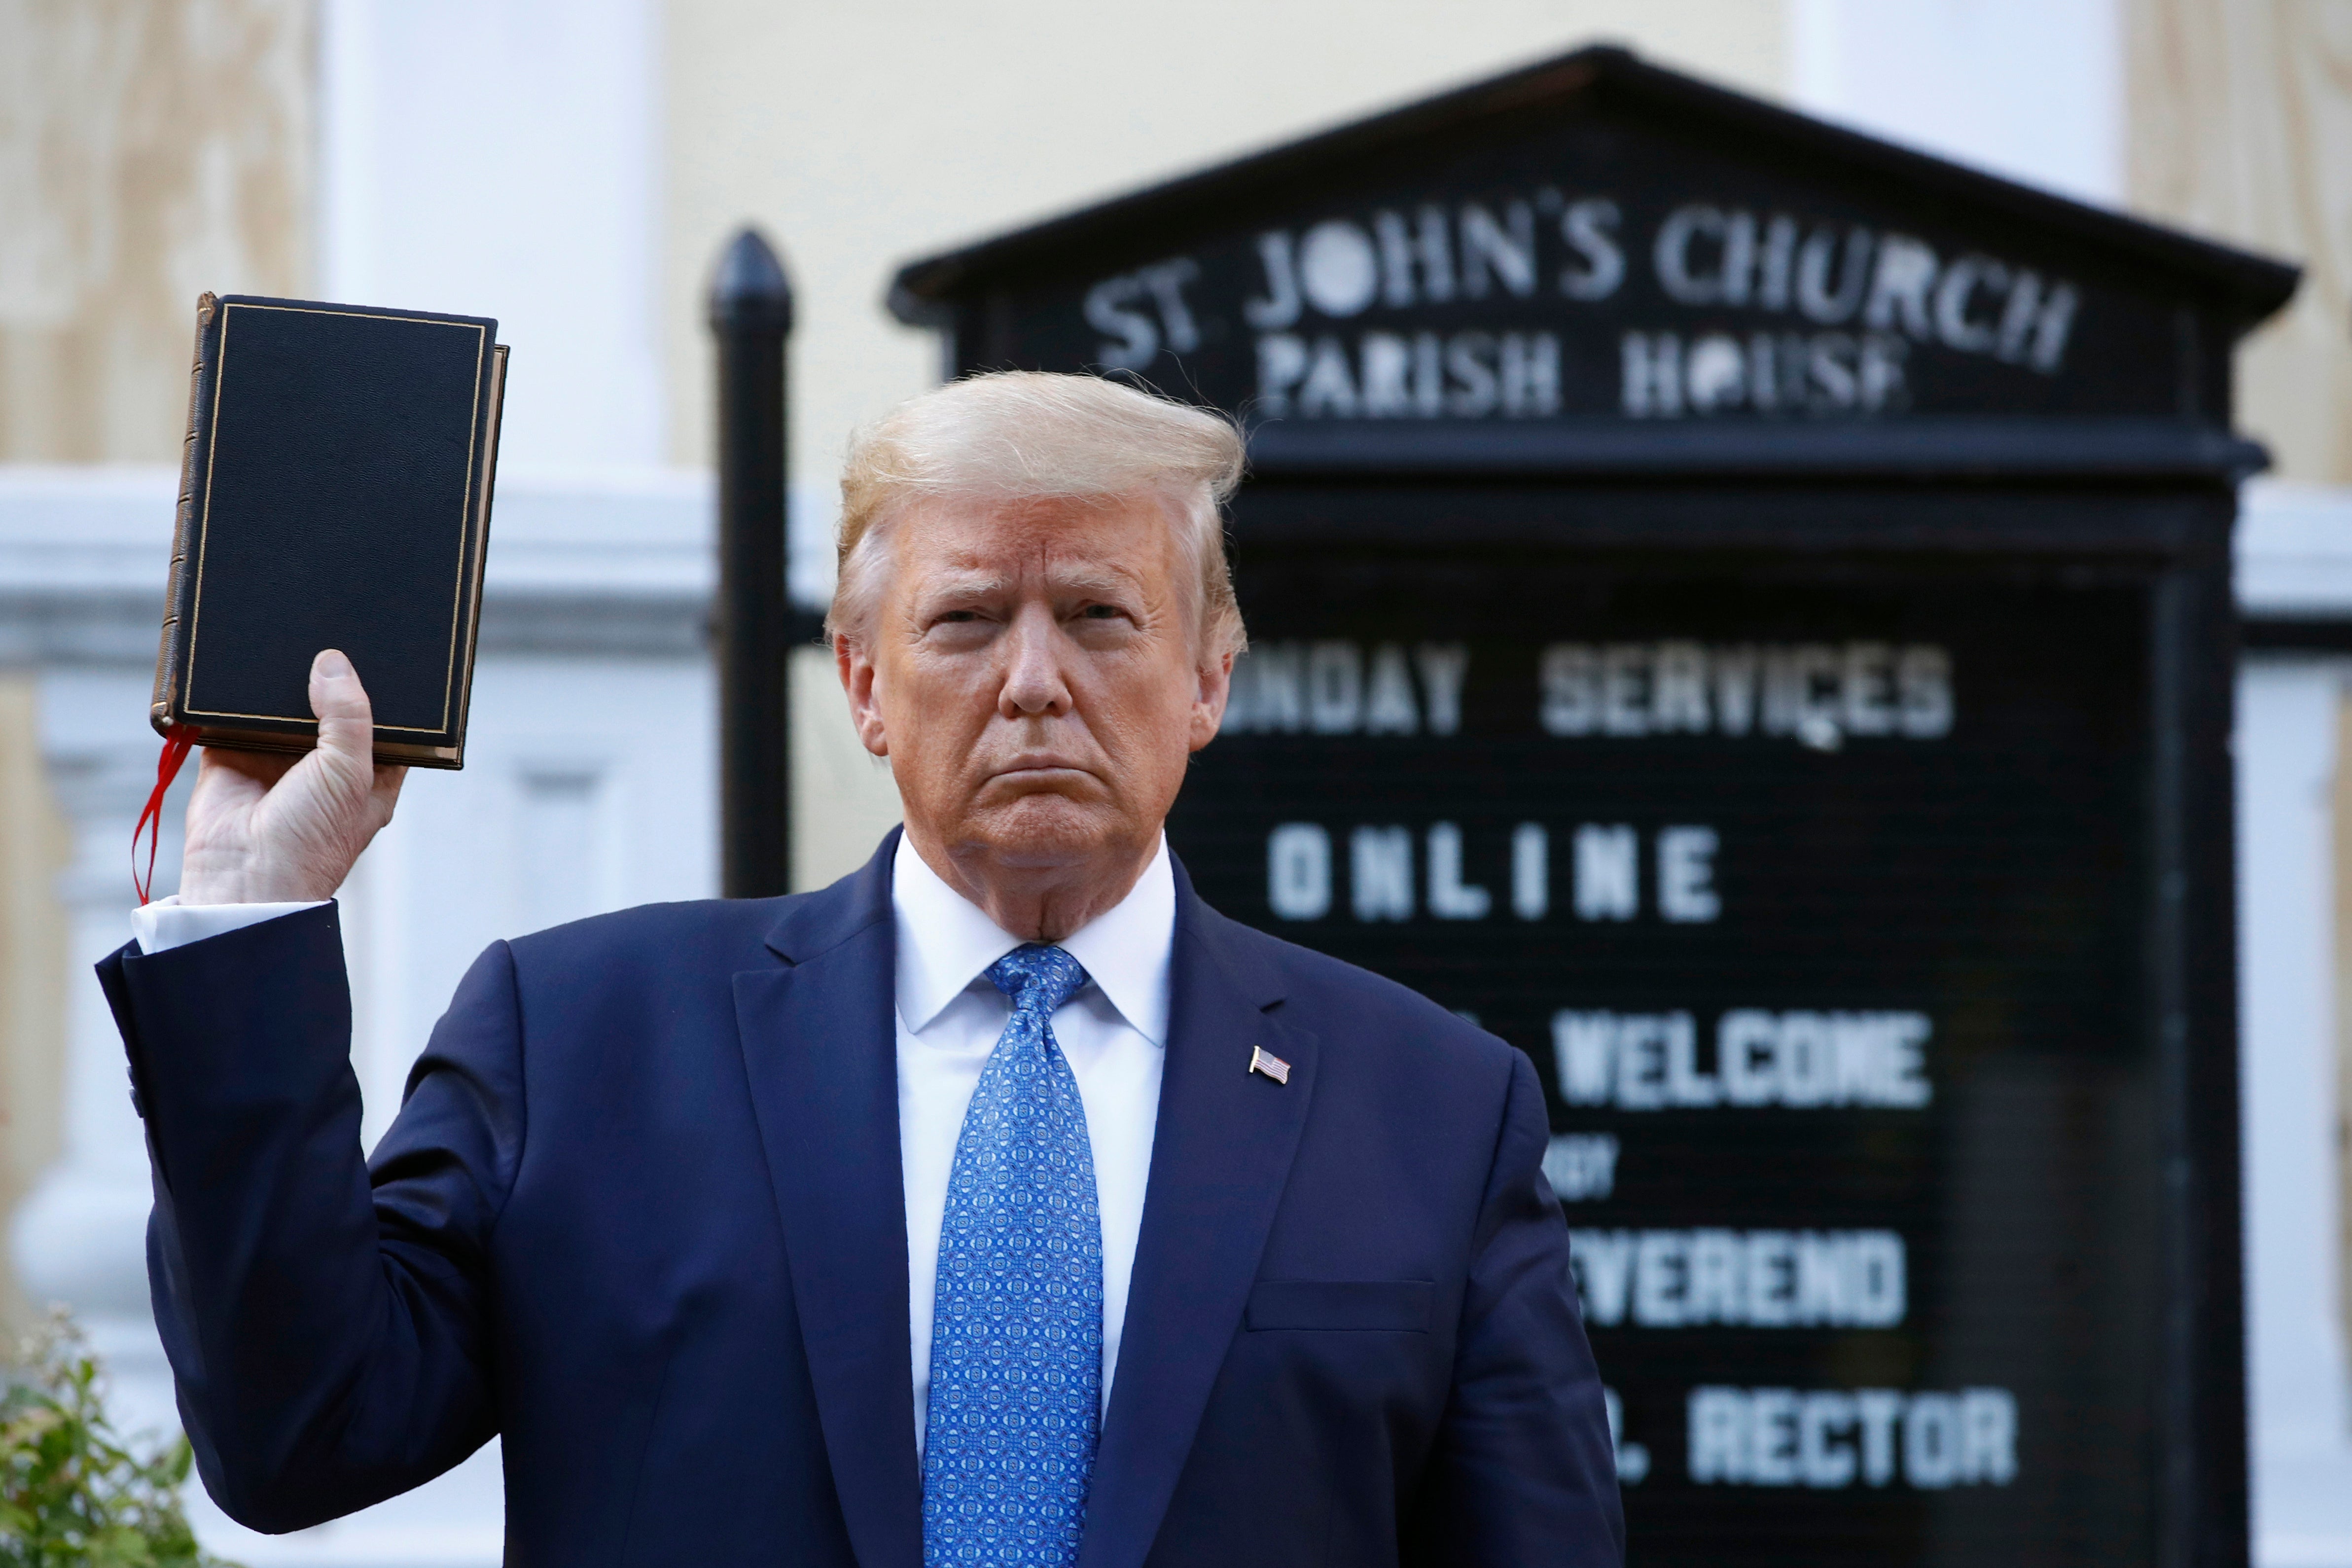 Trump was accused of using the Bible as a prop during his bizarre trip to a vandalised church in Washington, DC during the Black Lives Matter protests in 2020